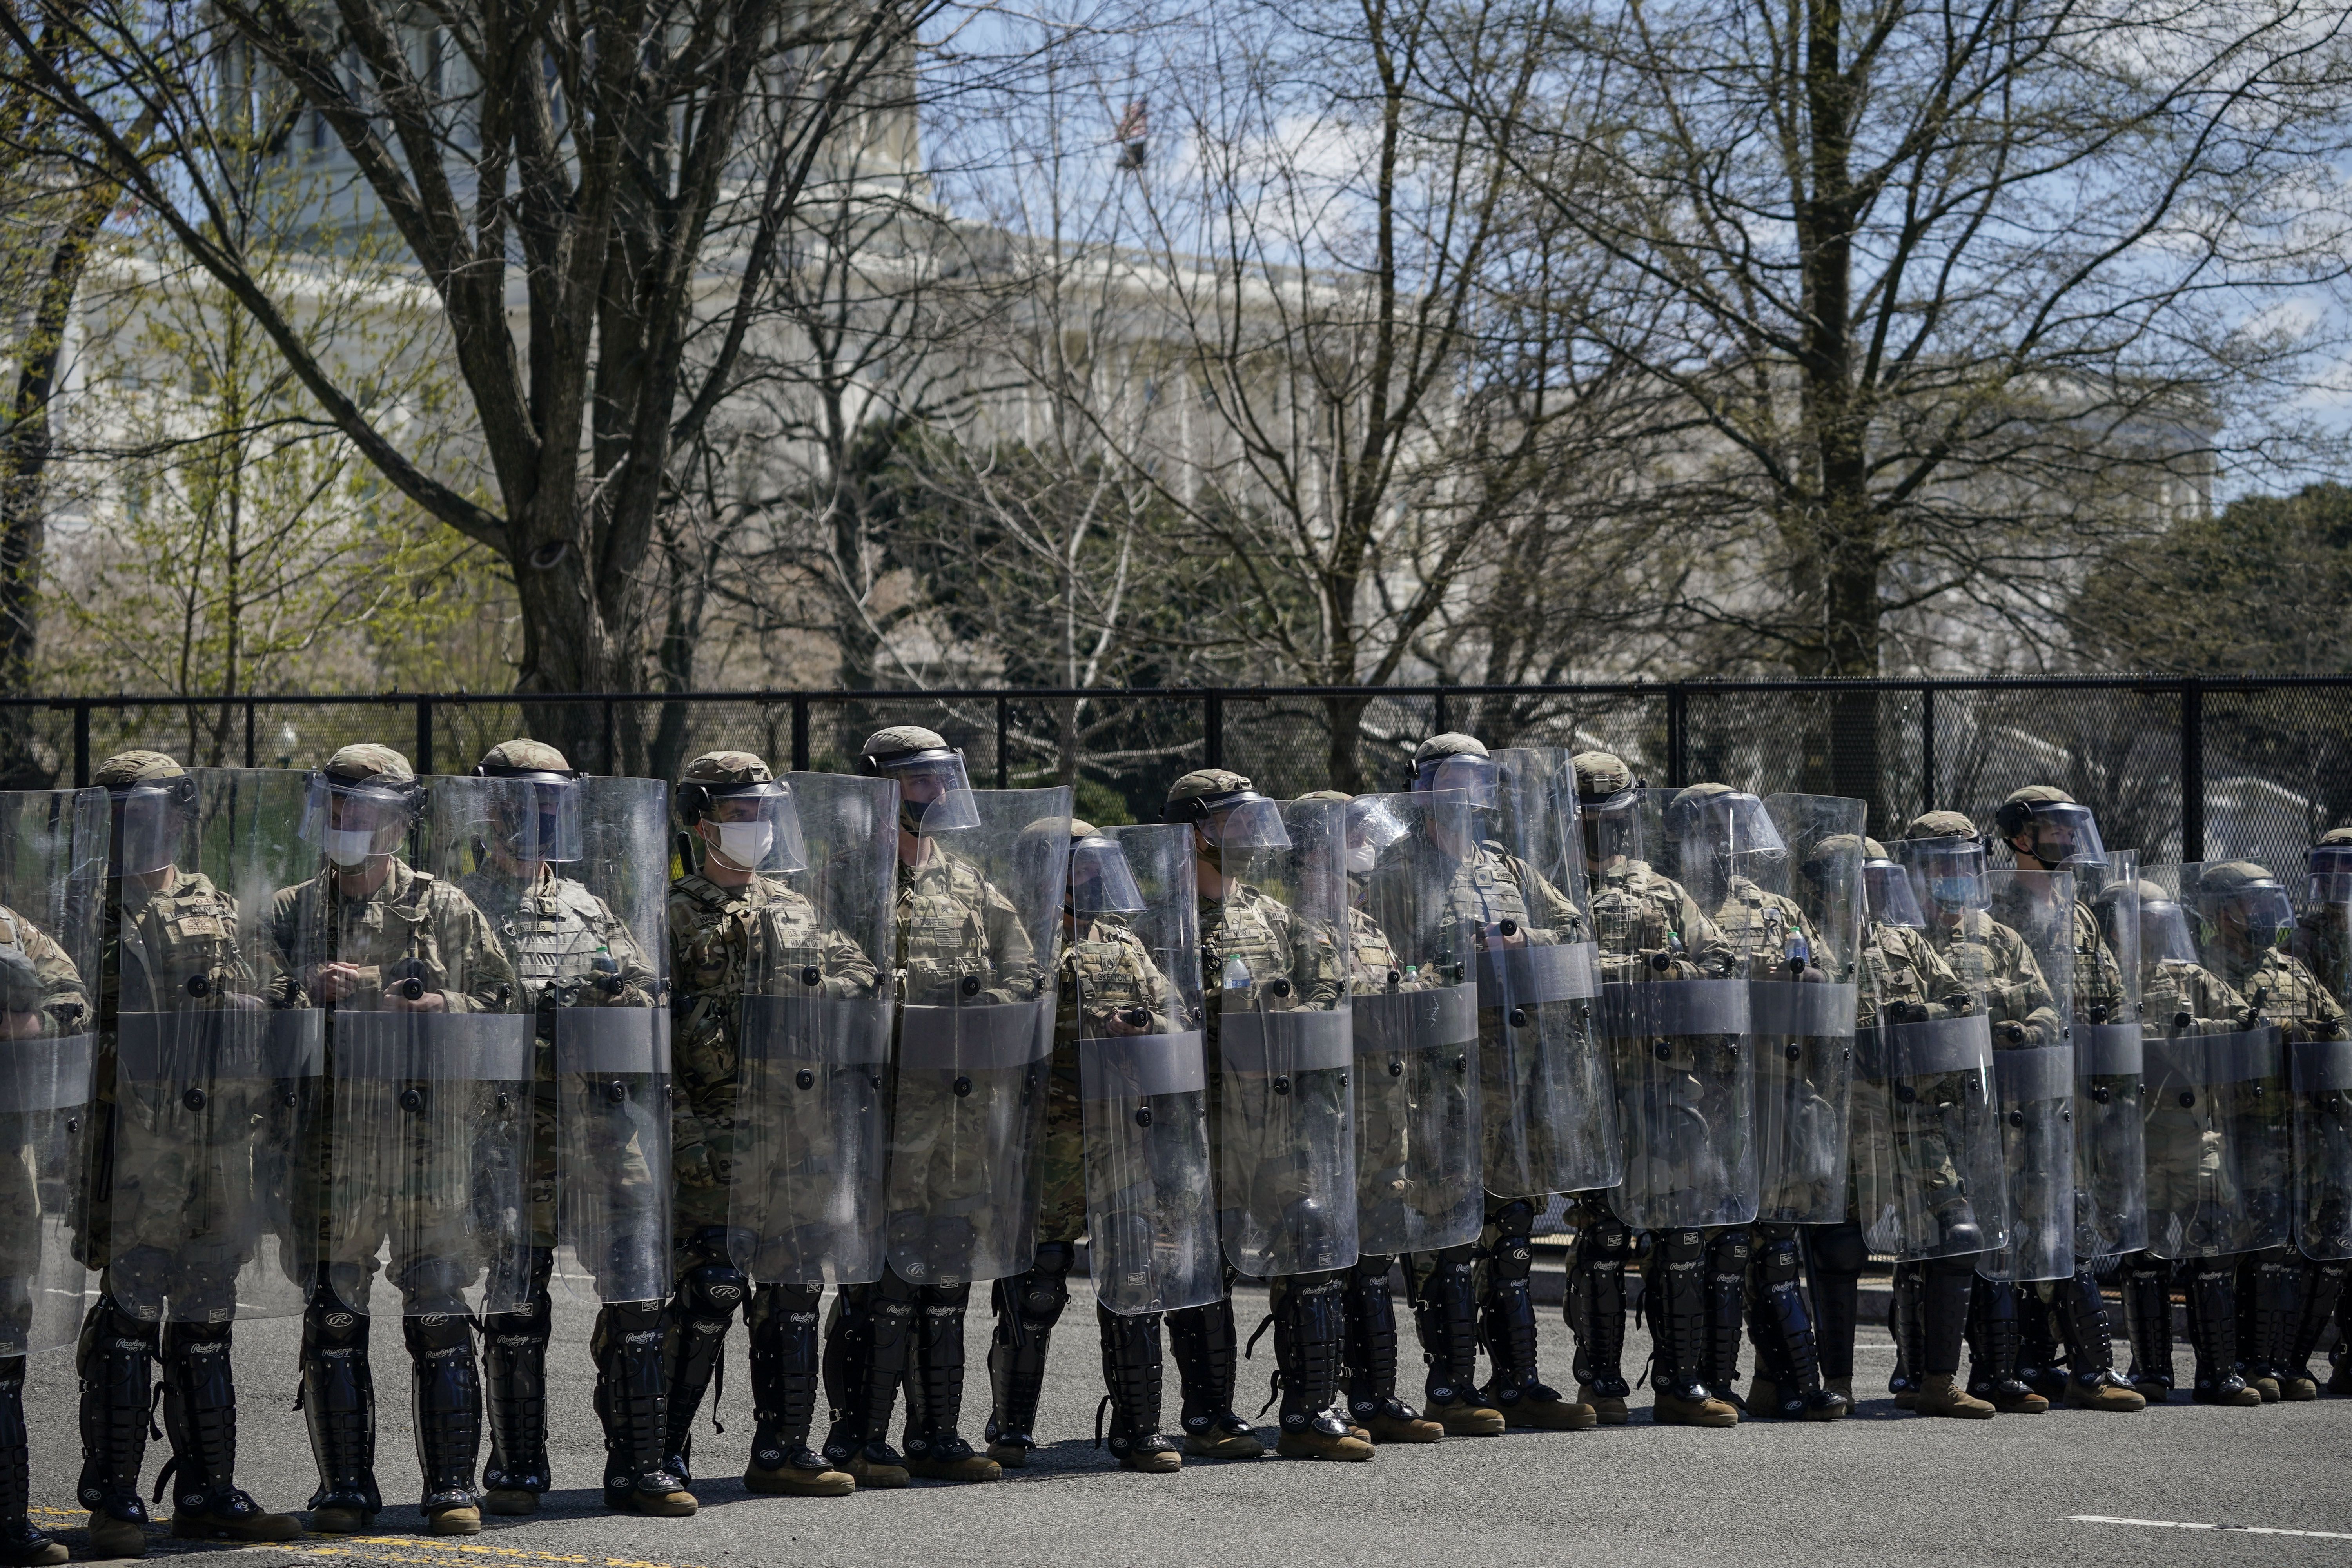 National Guard members standing guard on Constitution Avenue near the U.S. Capitol on April 2.